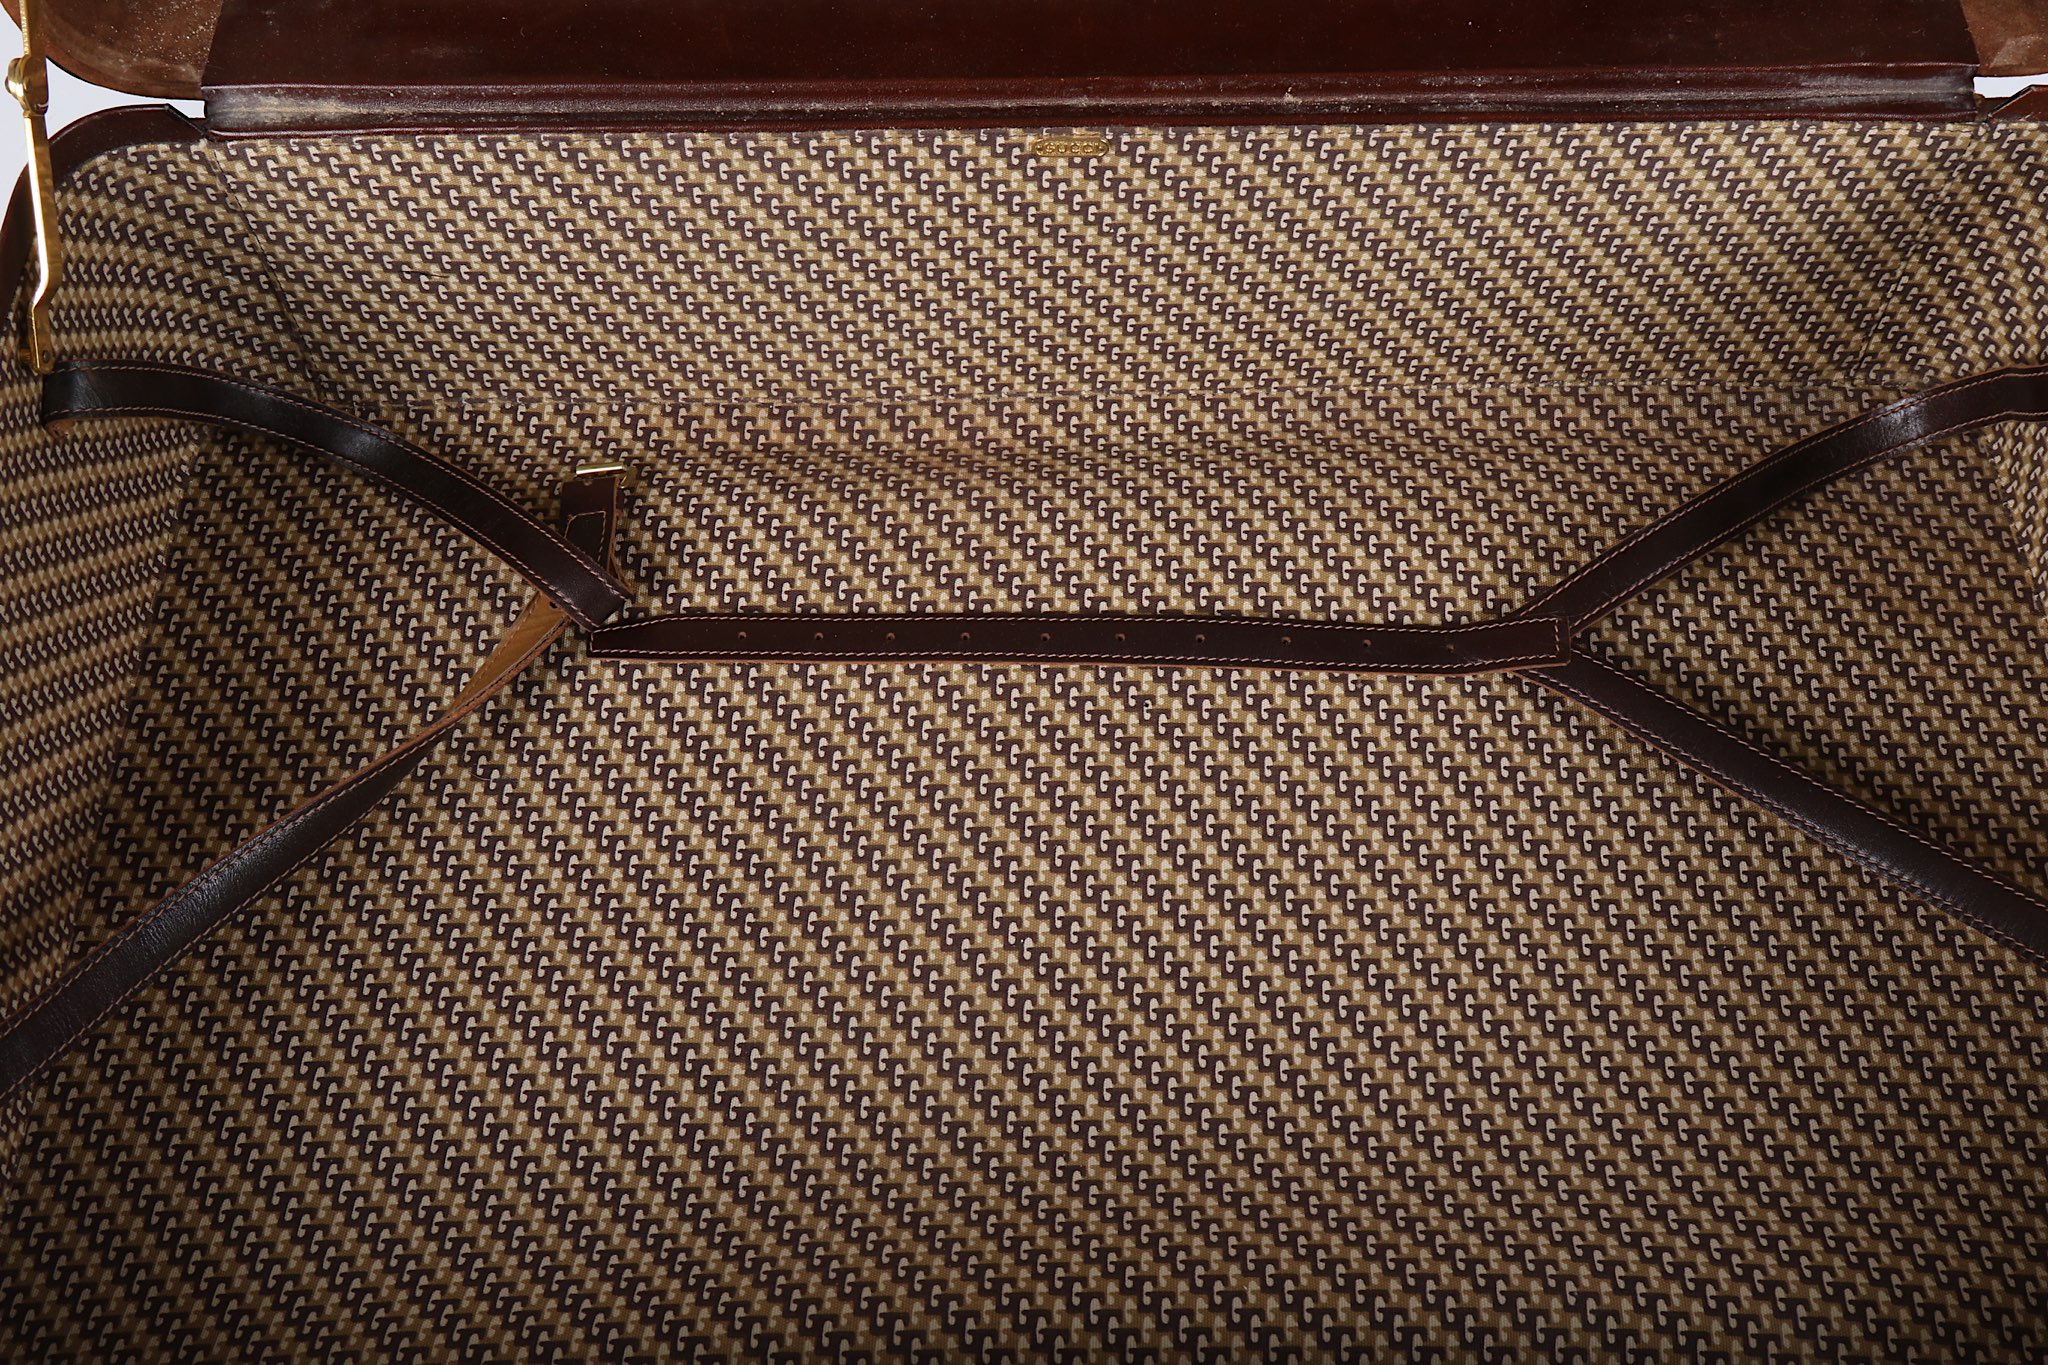 Gucci Vintage Suede Suitcase, brown leather trim a - Image 7 of 7